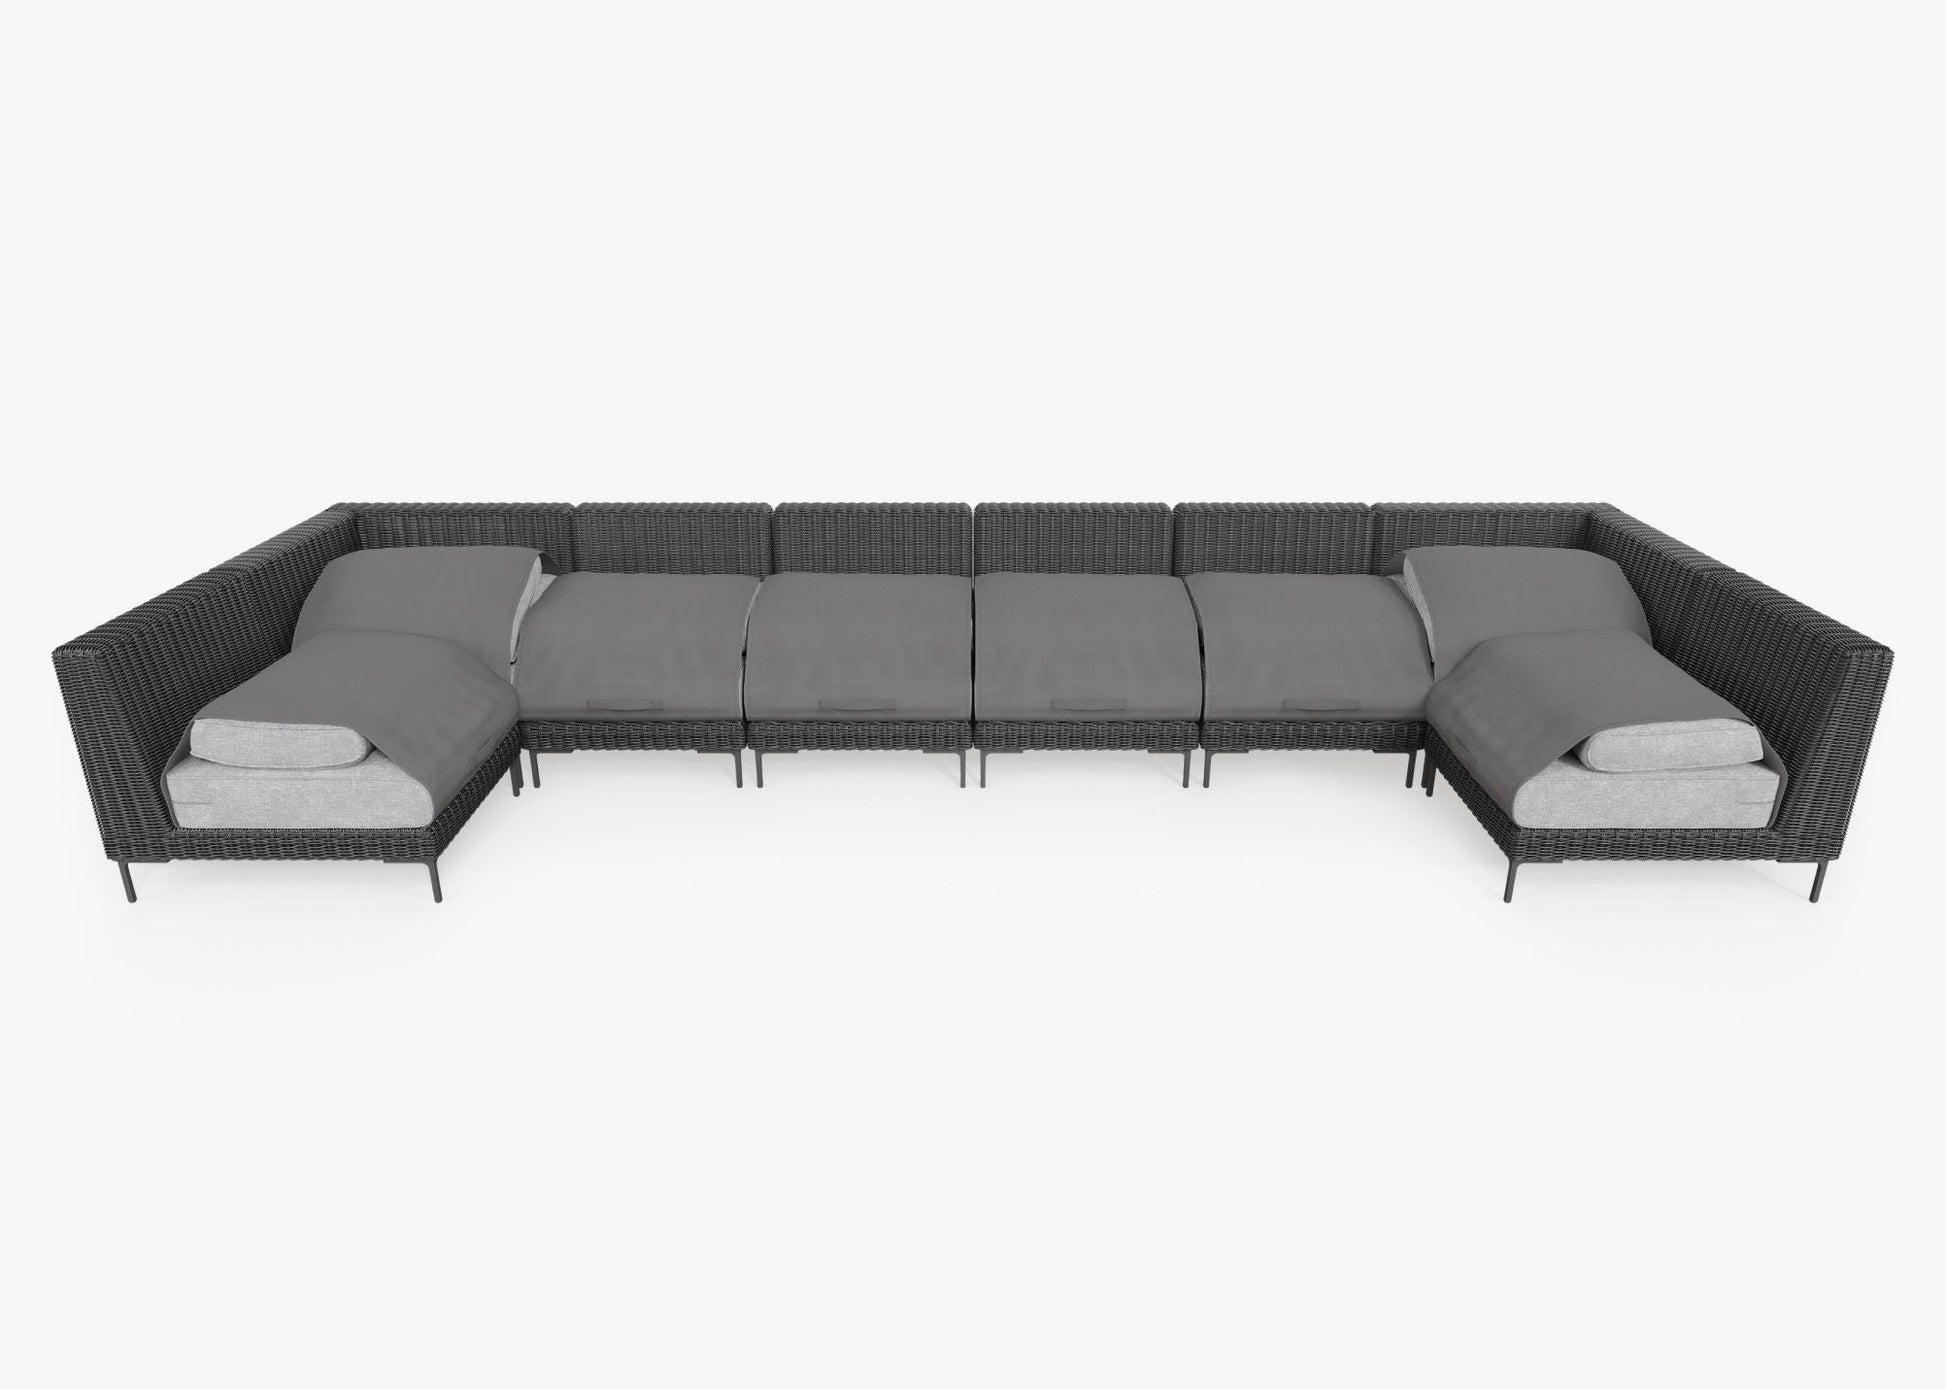 Live Outer 190" x 66" Black Wicker Outdoor U Sectional 8-Seat With Pacific Fog Gray Cushion